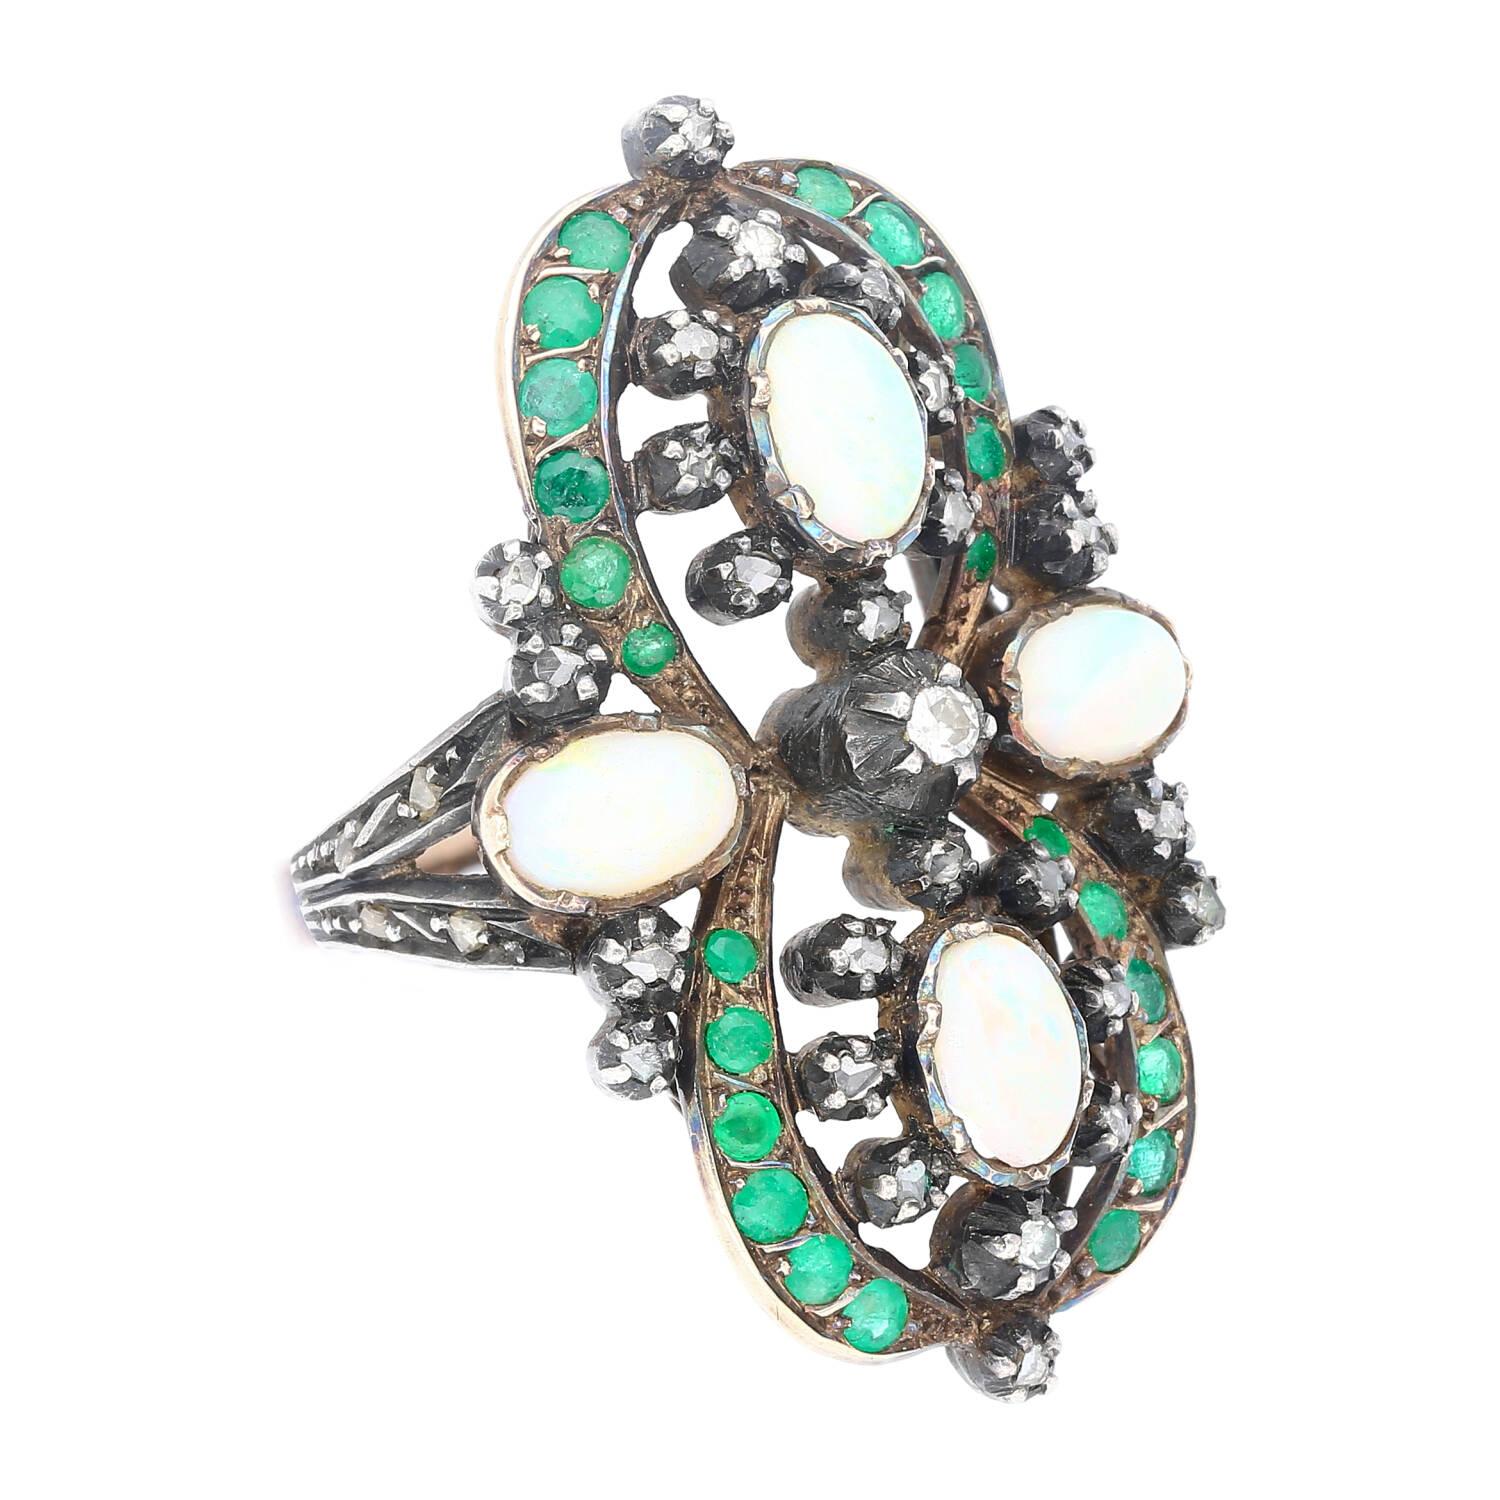 Oval Cut Antique Victorian Era 1800s Opal, Emerald, and Diamond Ring in Gold and Silver For Sale